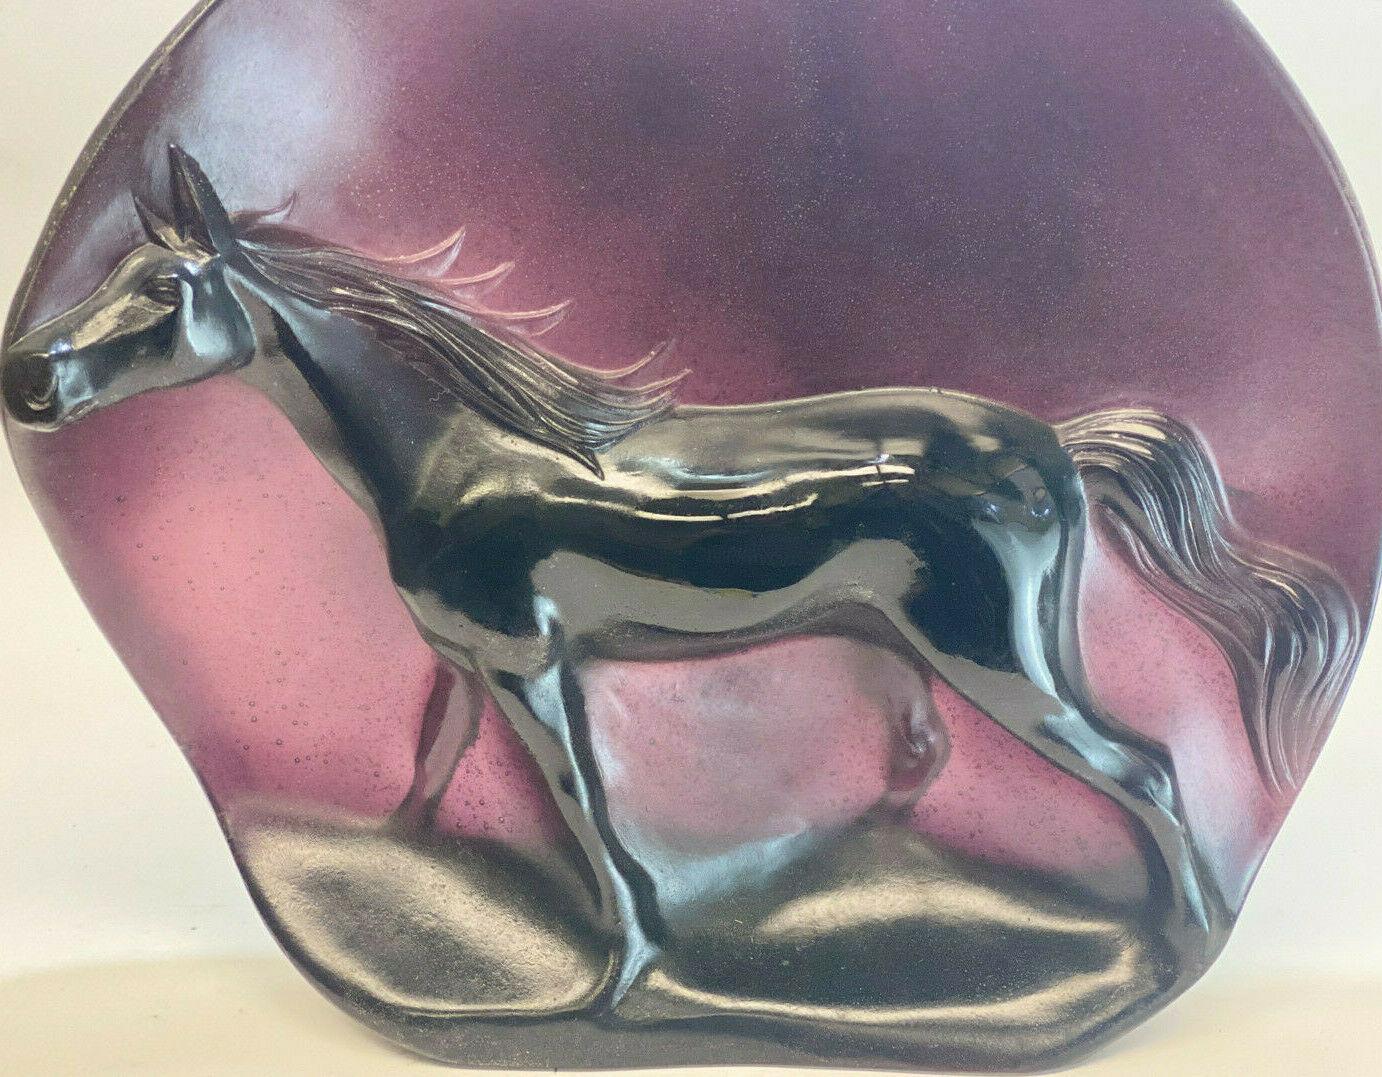 Daum France amethyst pâte de verre horse sculpture, Camargue by Guy Petitfils. Marked Daum France along with the artist's embossed signature to the verso. Limited edition of 150. 

Weight approximate, 20 lbs

Measures approximate: 16.5 inches x